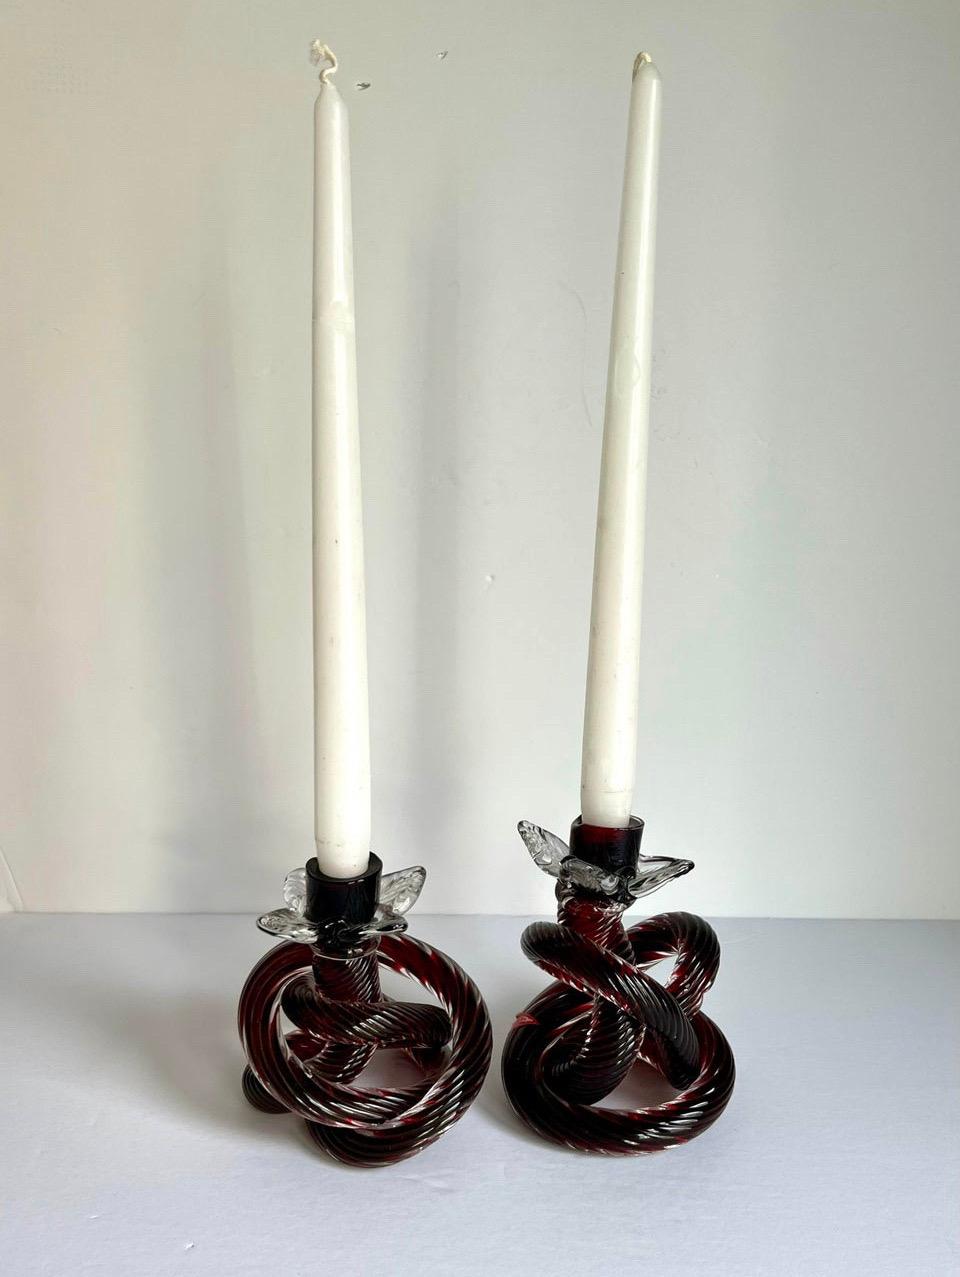 Unique pair of hand blown glass knot candle holders, beautiful deep burgundy color, original label attached.
art at its best!
One is slightly bigger than the other one
Measures: Candle holder #1- 4” x 5” x 5.5” H
Candle holder #2- 4” x 5” x 6” H.